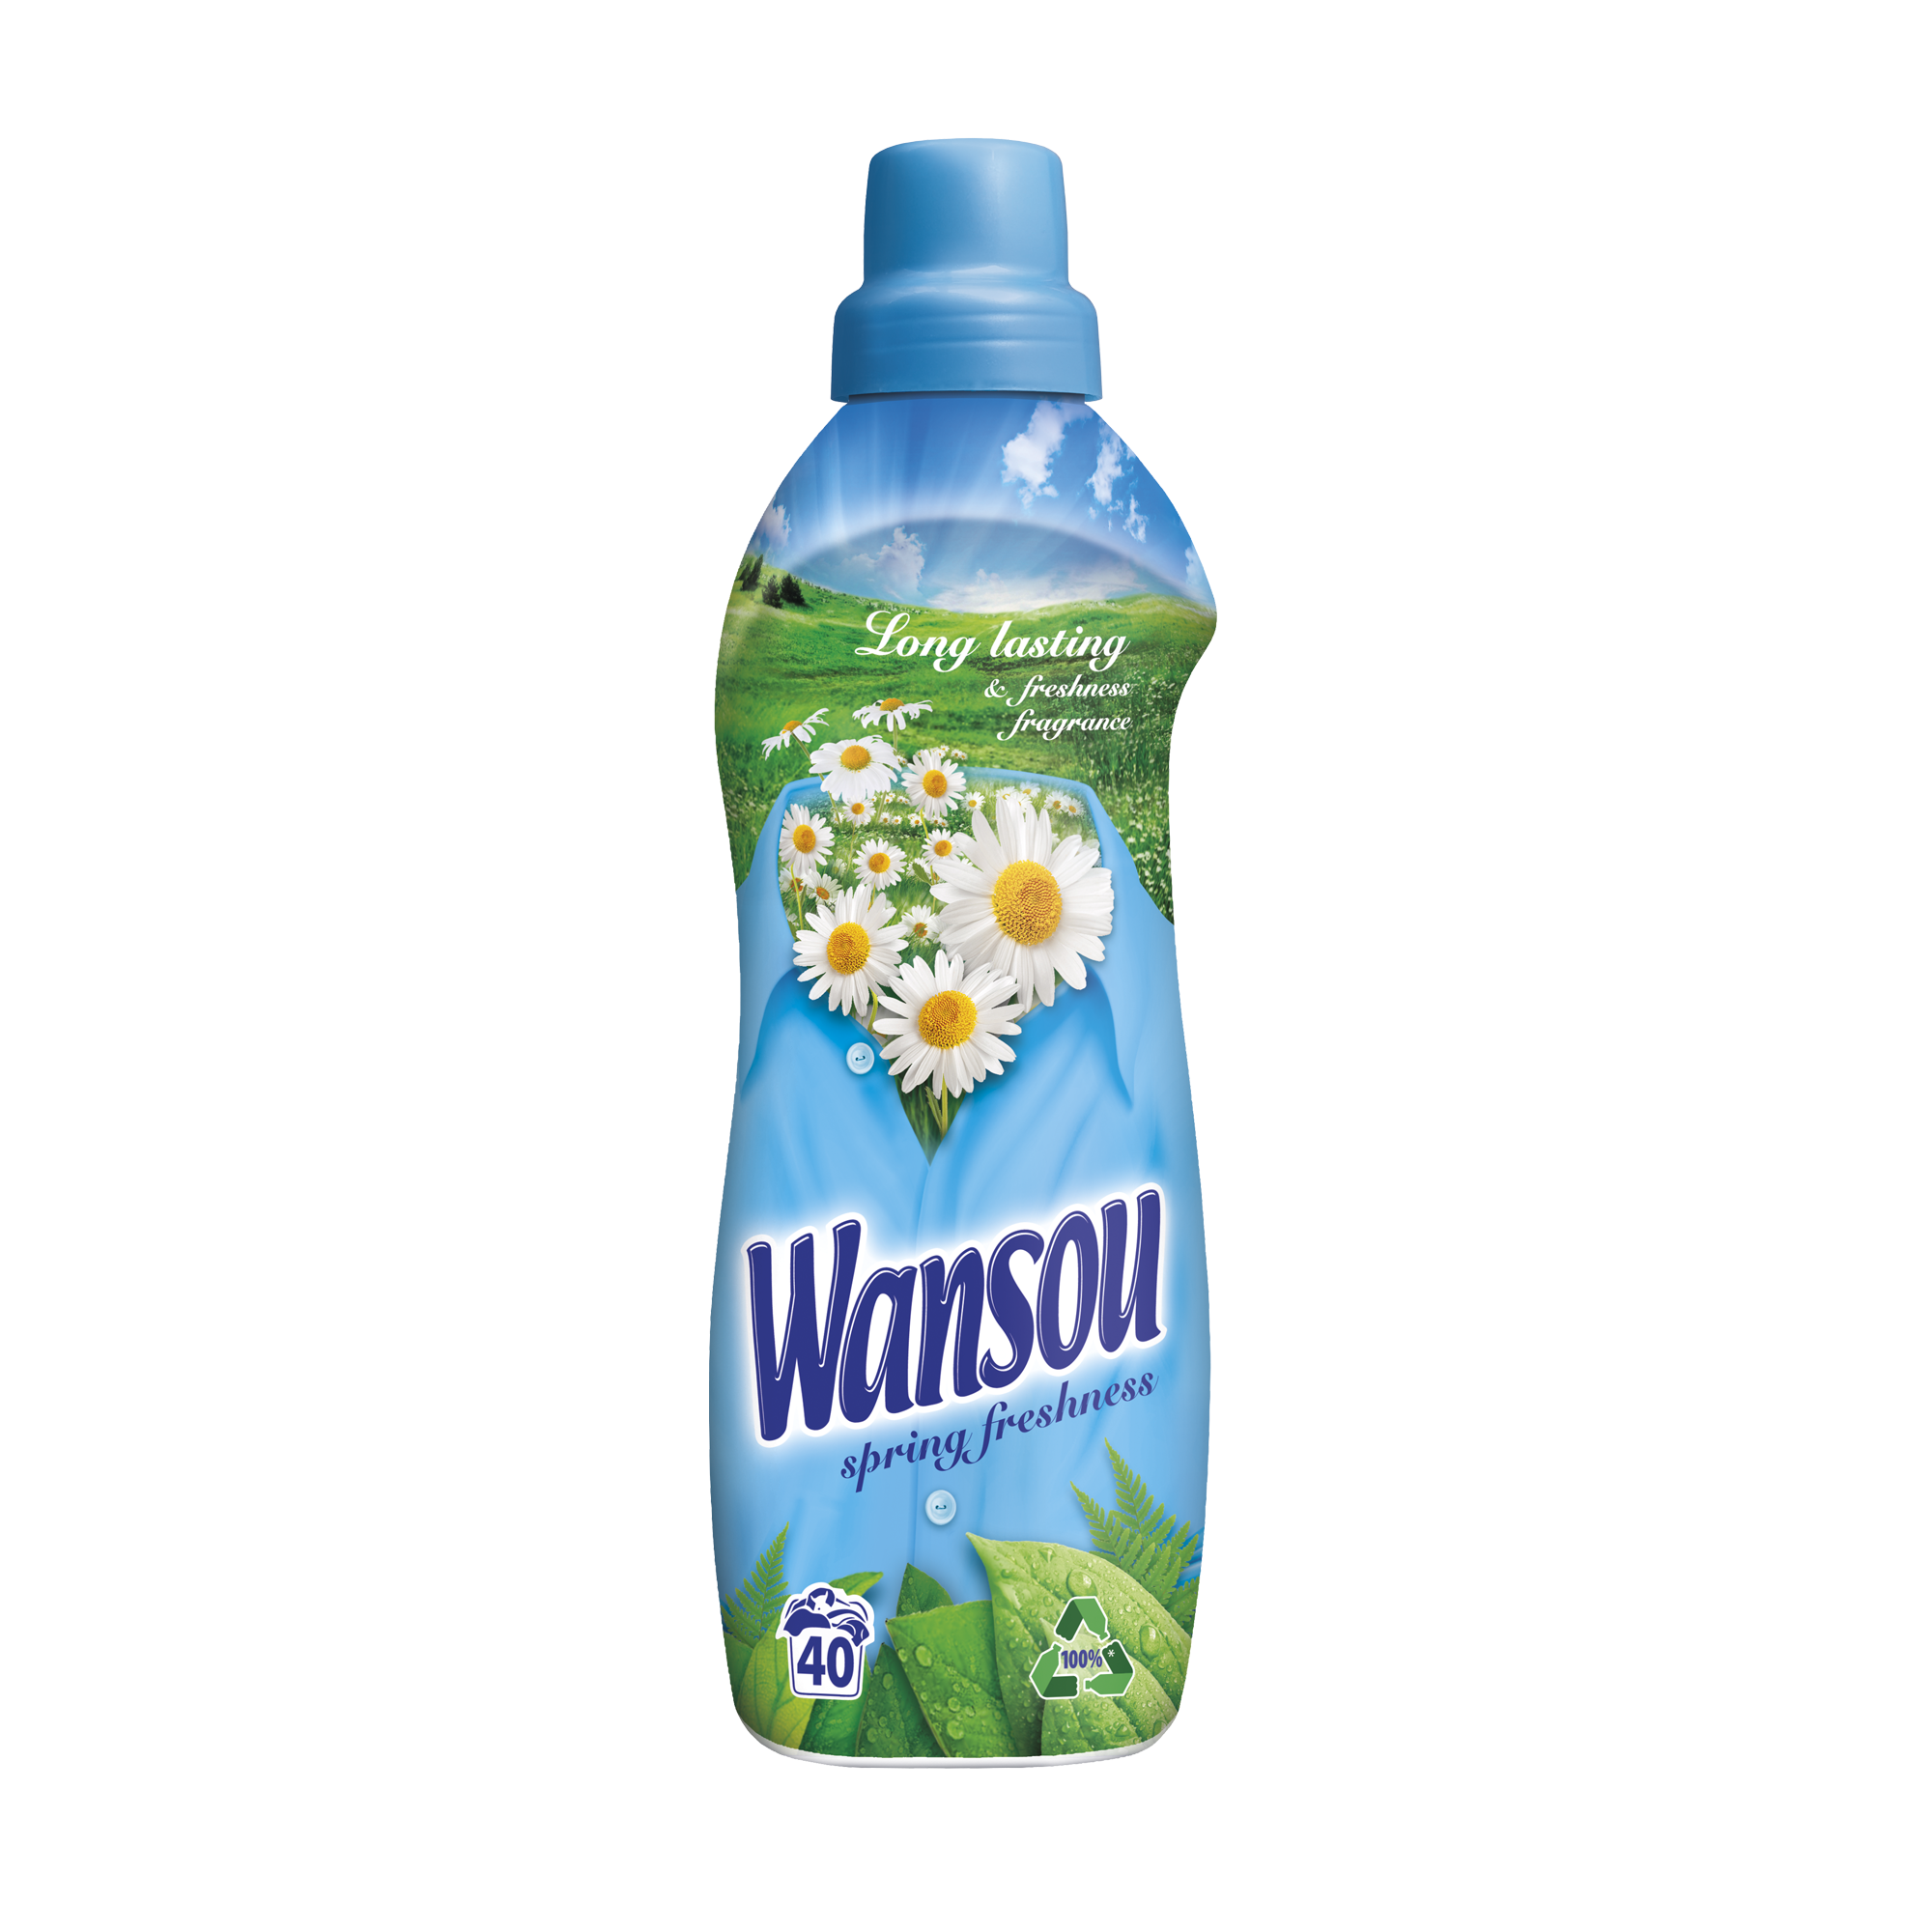 Wansou concentrated fabric softener Spring Freshness